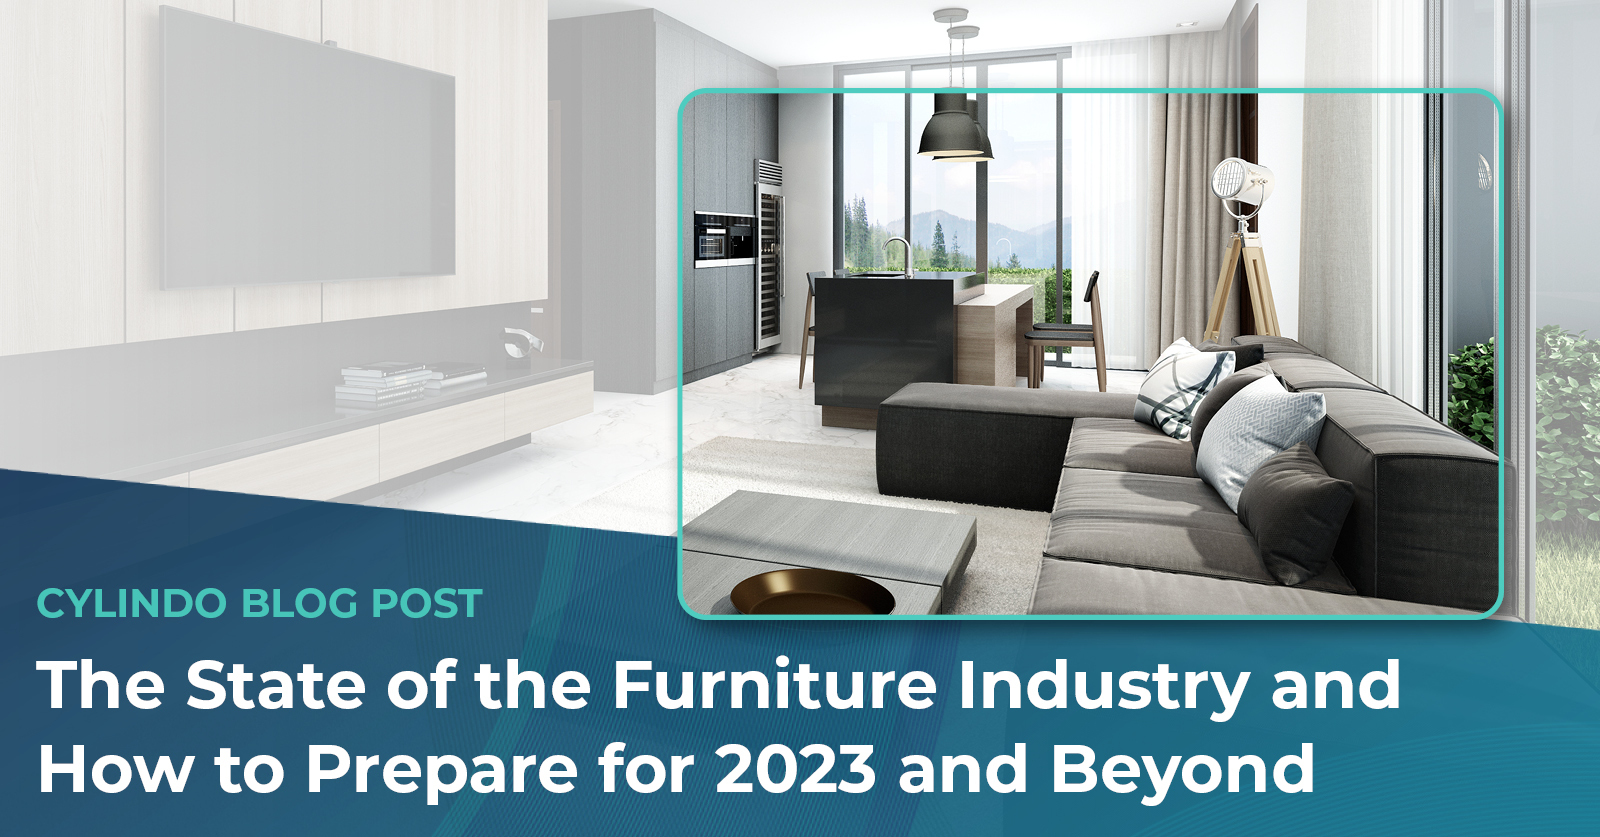 The State of the Furniture Industry and How to Prepare for 2023